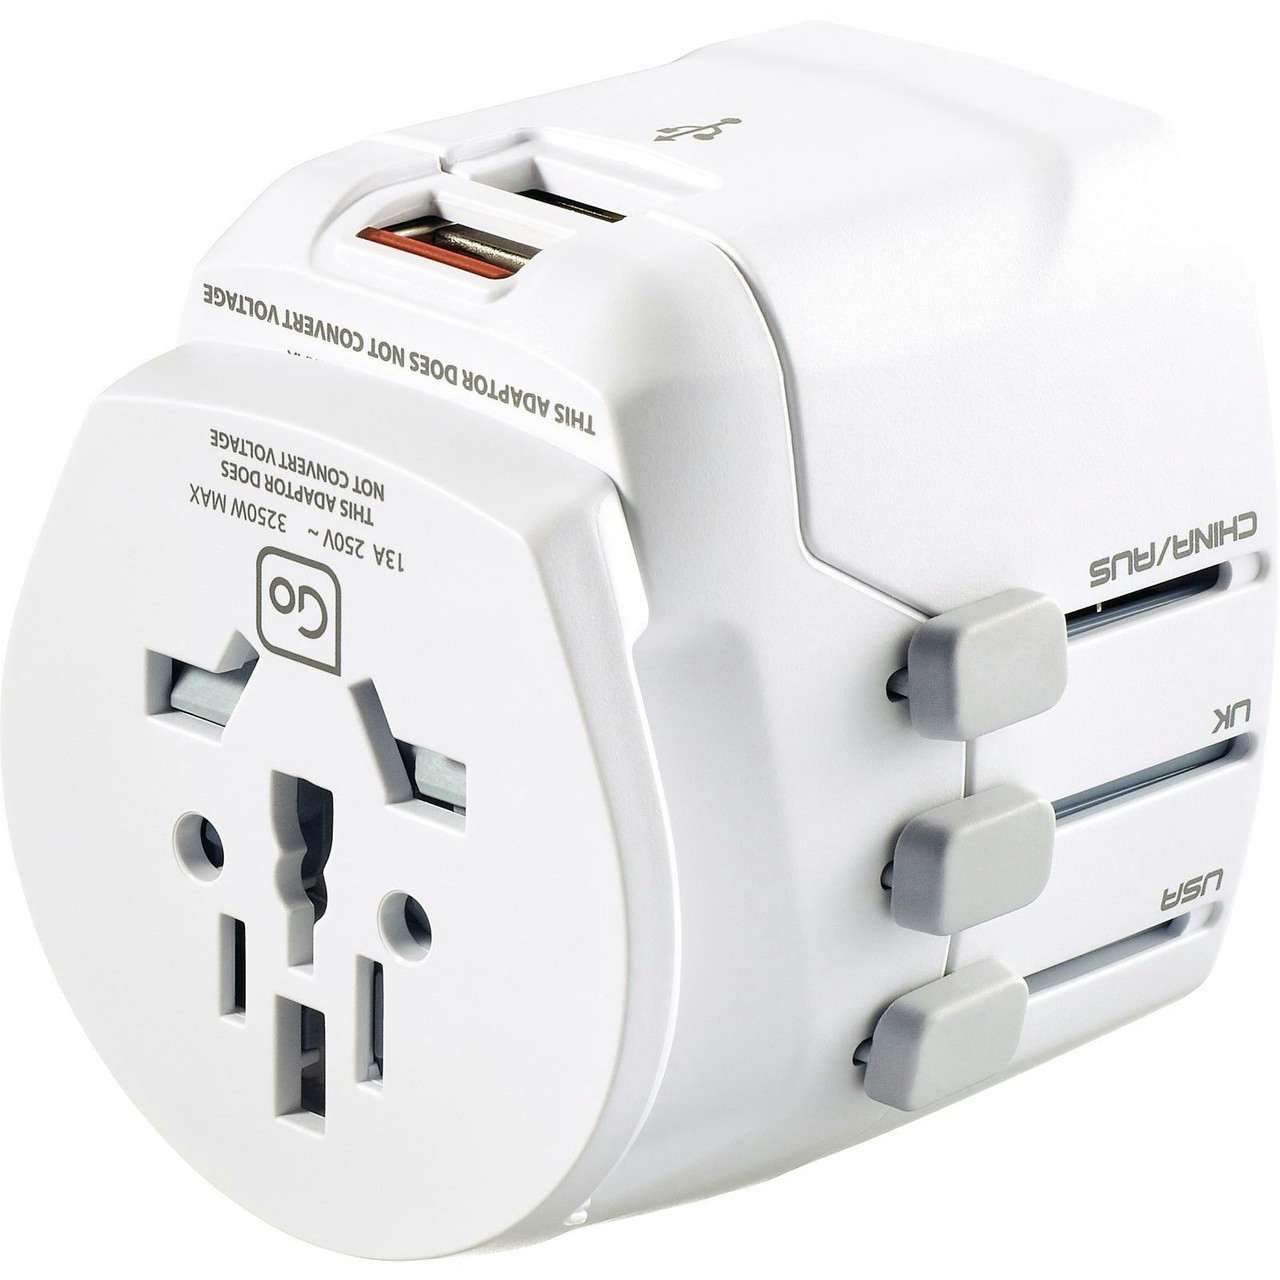 Worldwide Travel Adapter with USB White